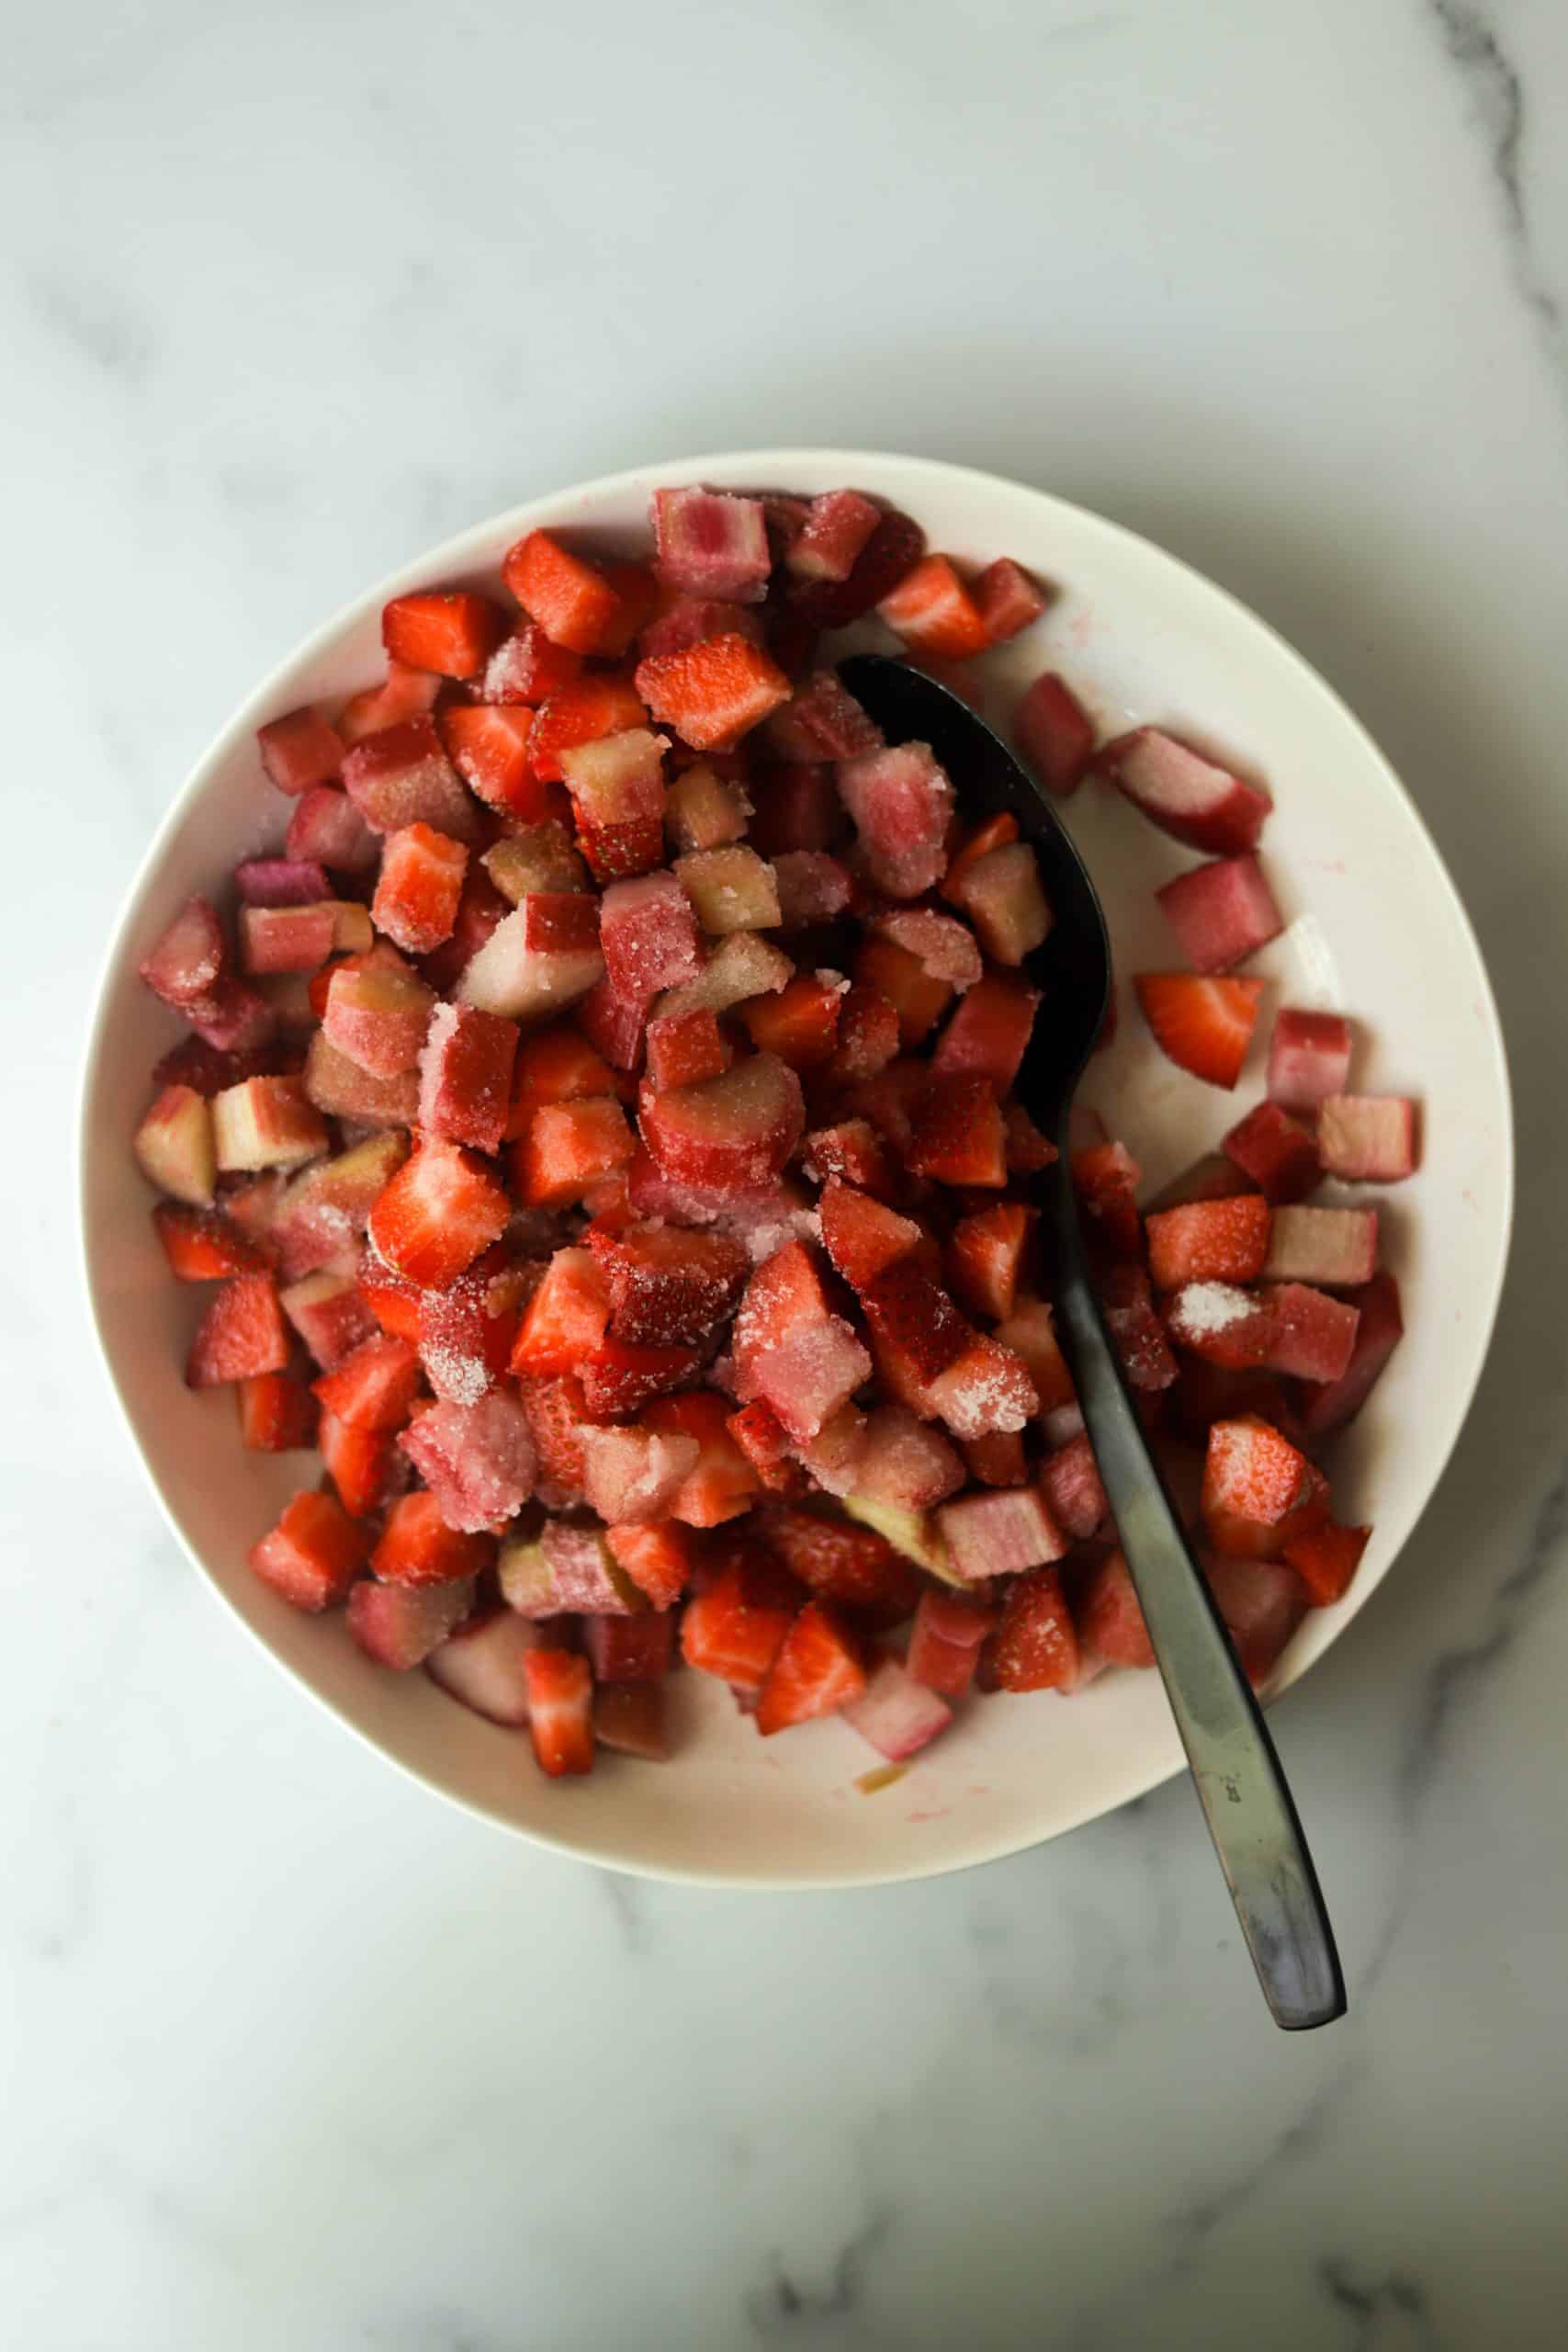 A white bowl filled with strawberries and rhubarb.